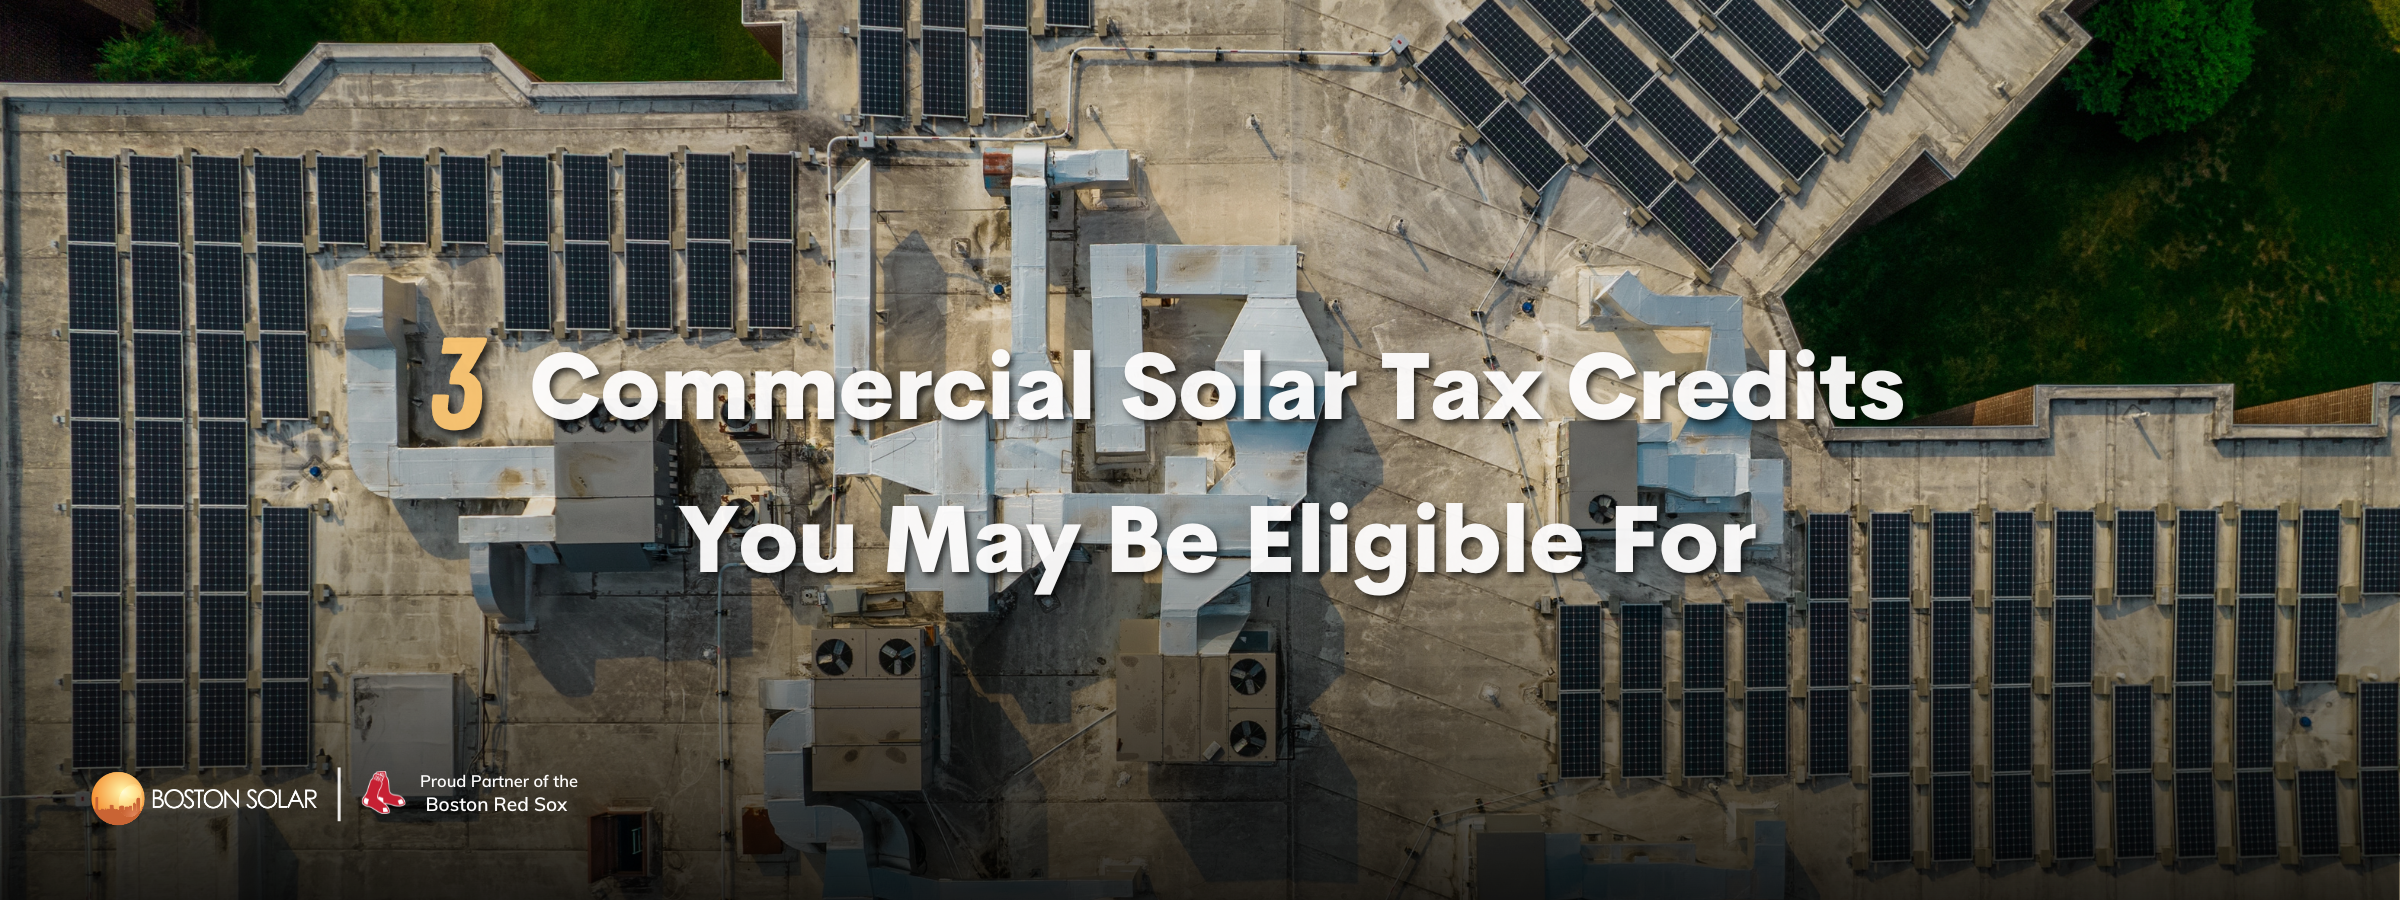 3 Bonus Commercial Solar Tax Credits You May Be Eligible For